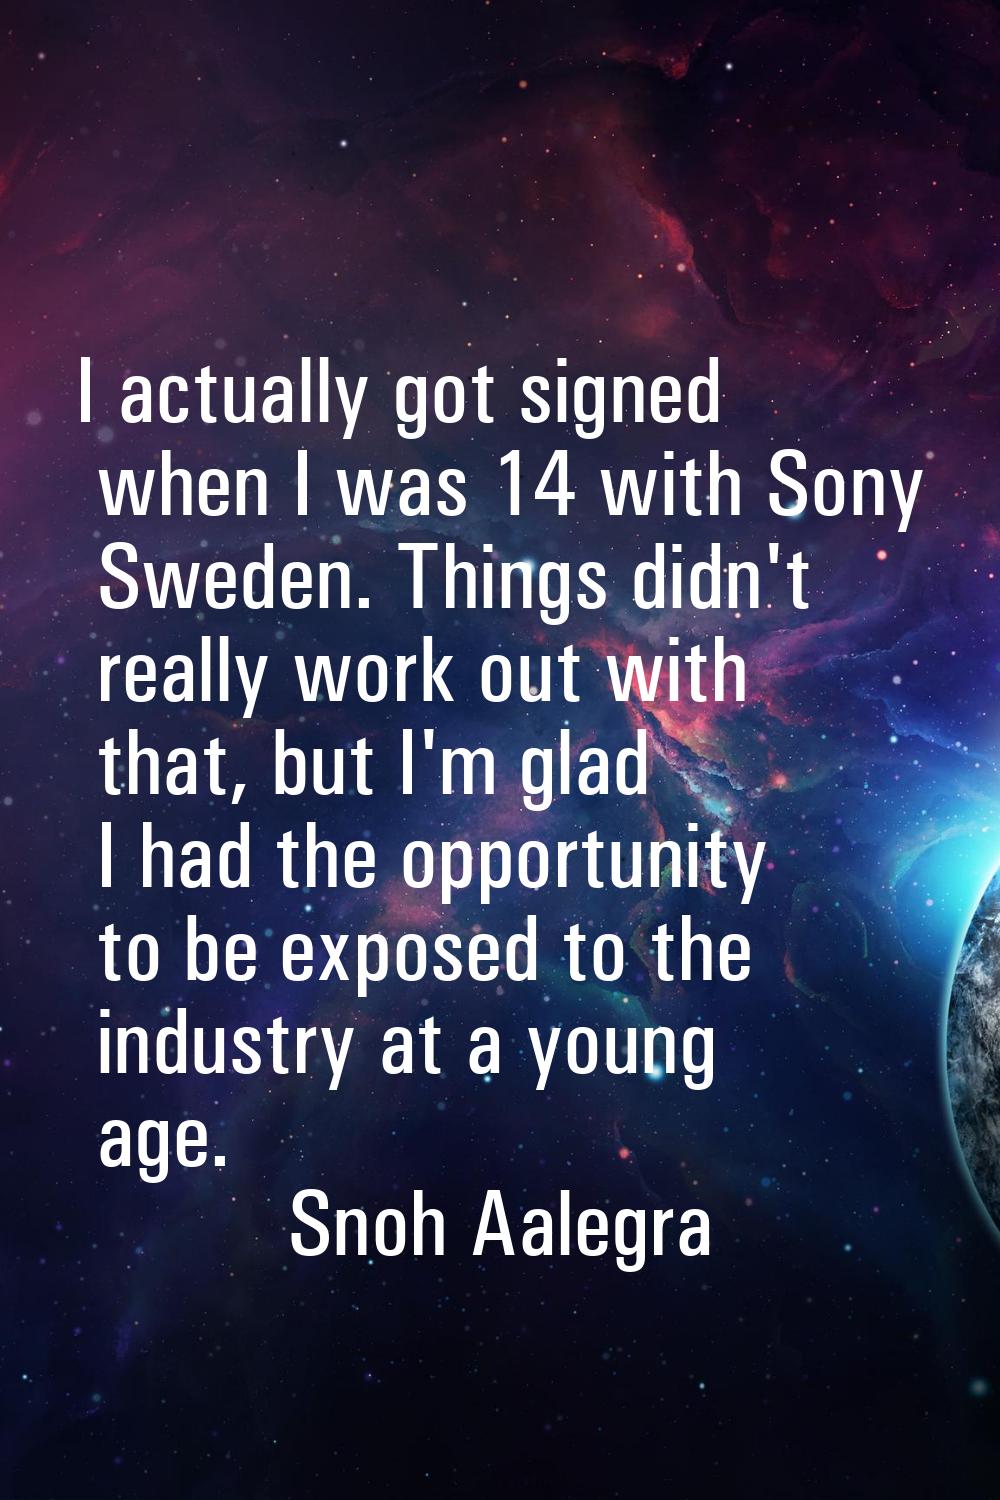 I actually got signed when I was 14 with Sony Sweden. Things didn't really work out with that, but 